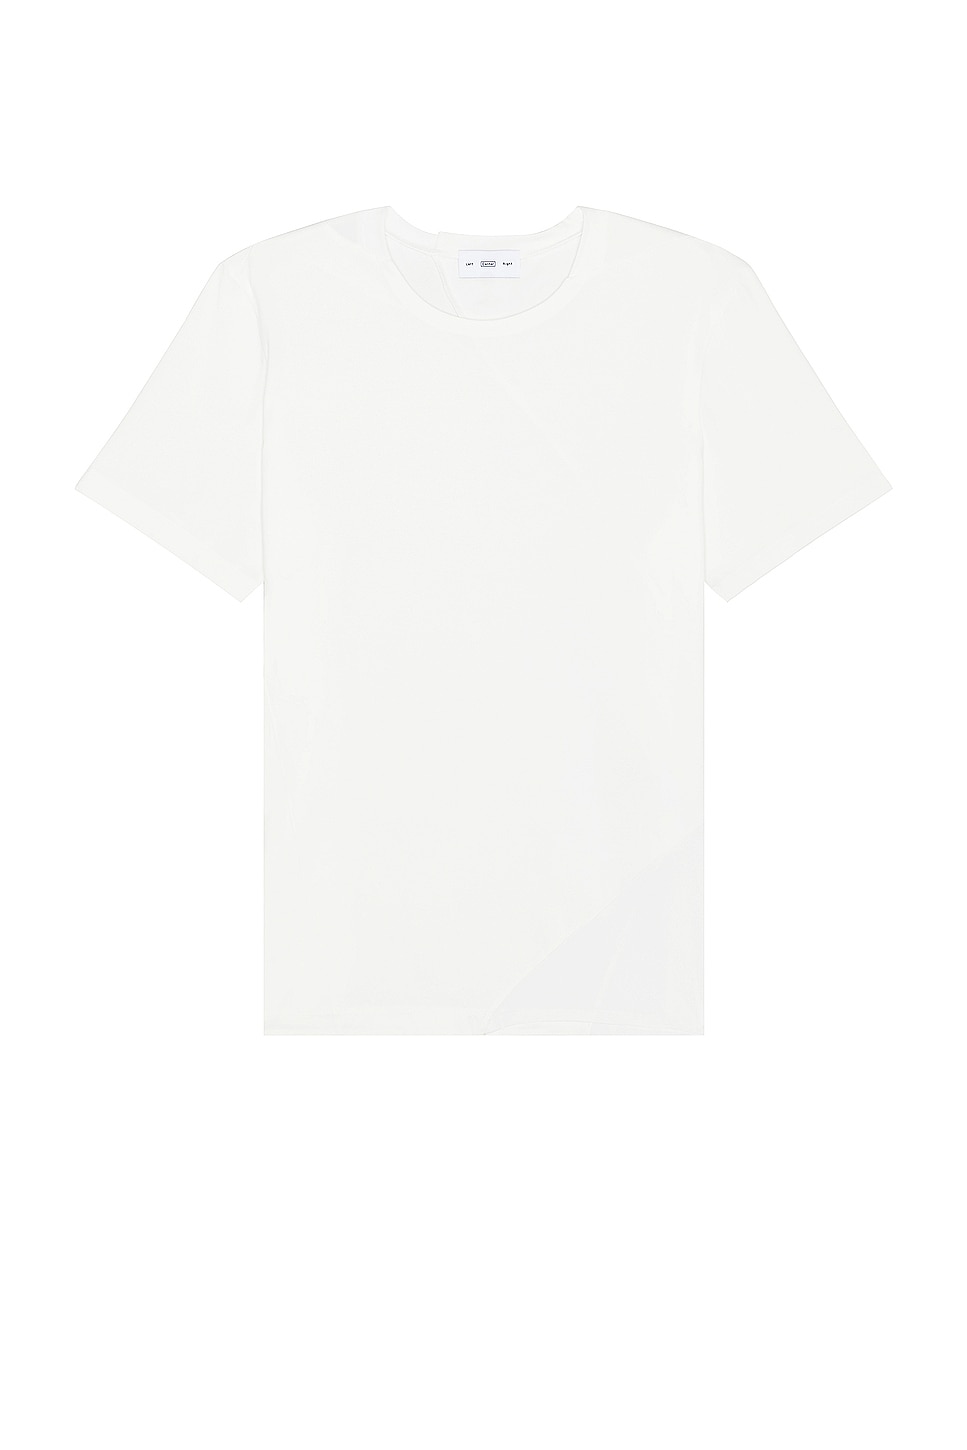 Image 1 of POST ARCHIVE FACTION (PAF) 6.0 Tee in White